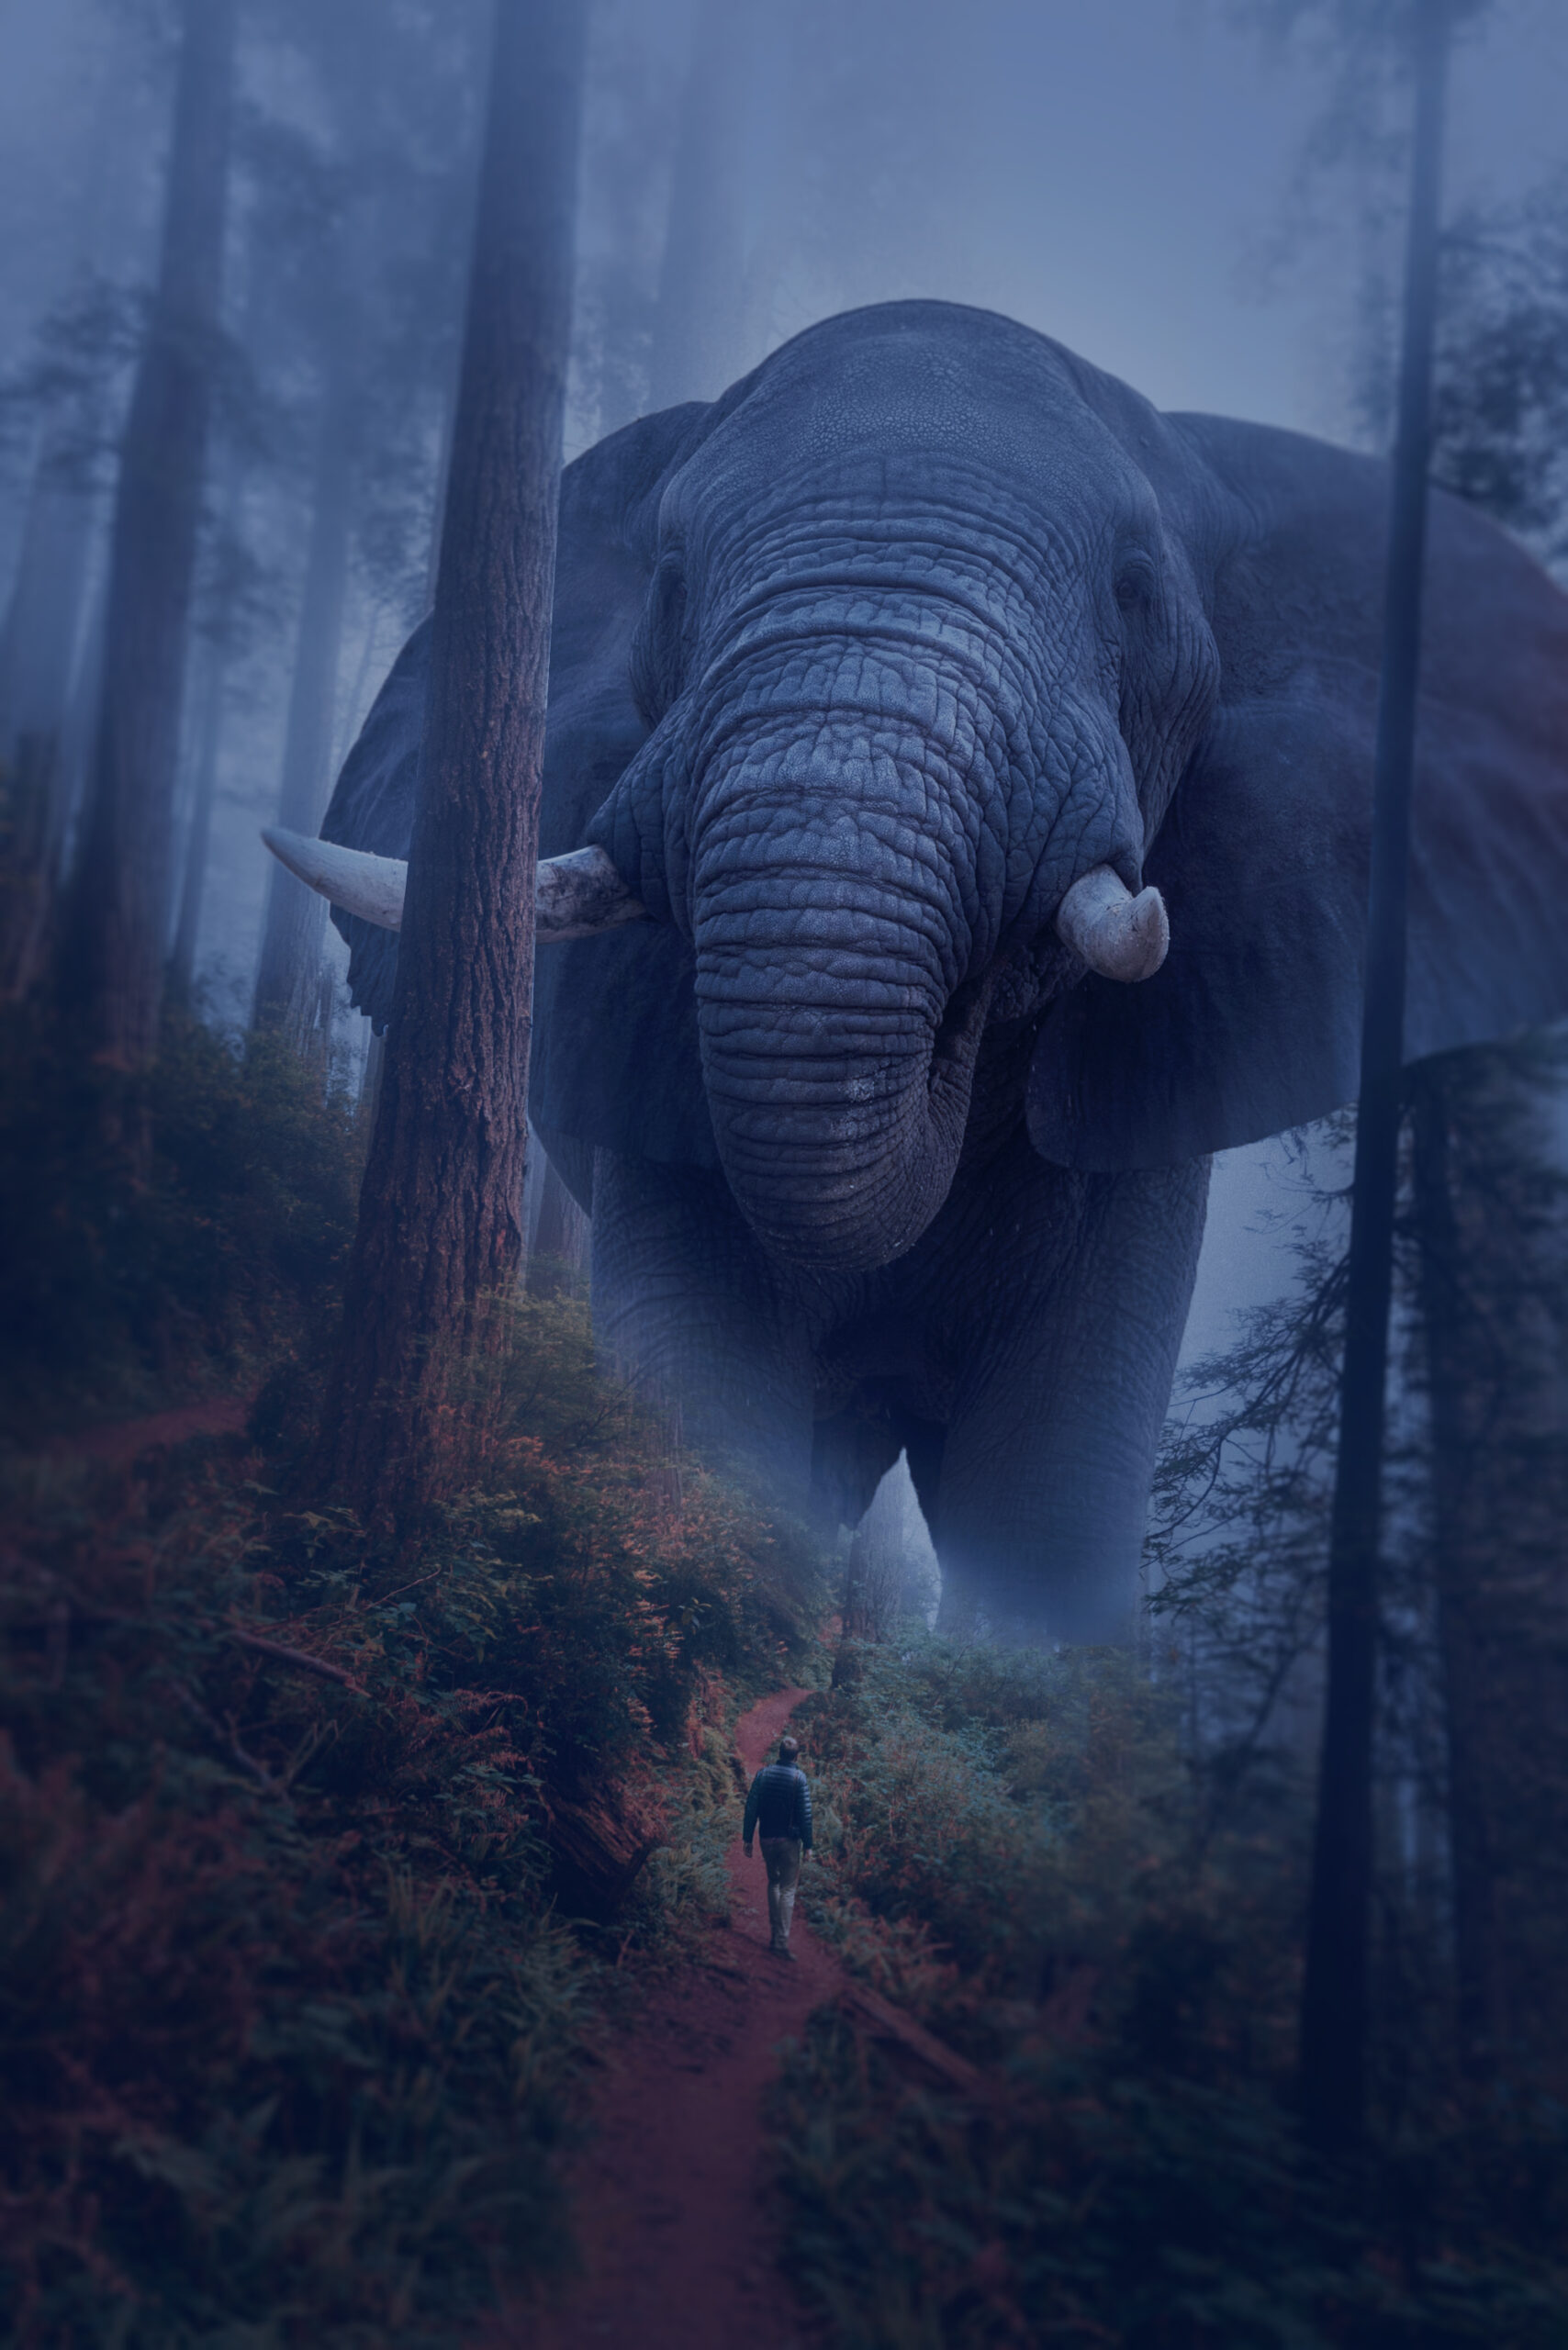 Elephant in the woods | Sunlinedesign